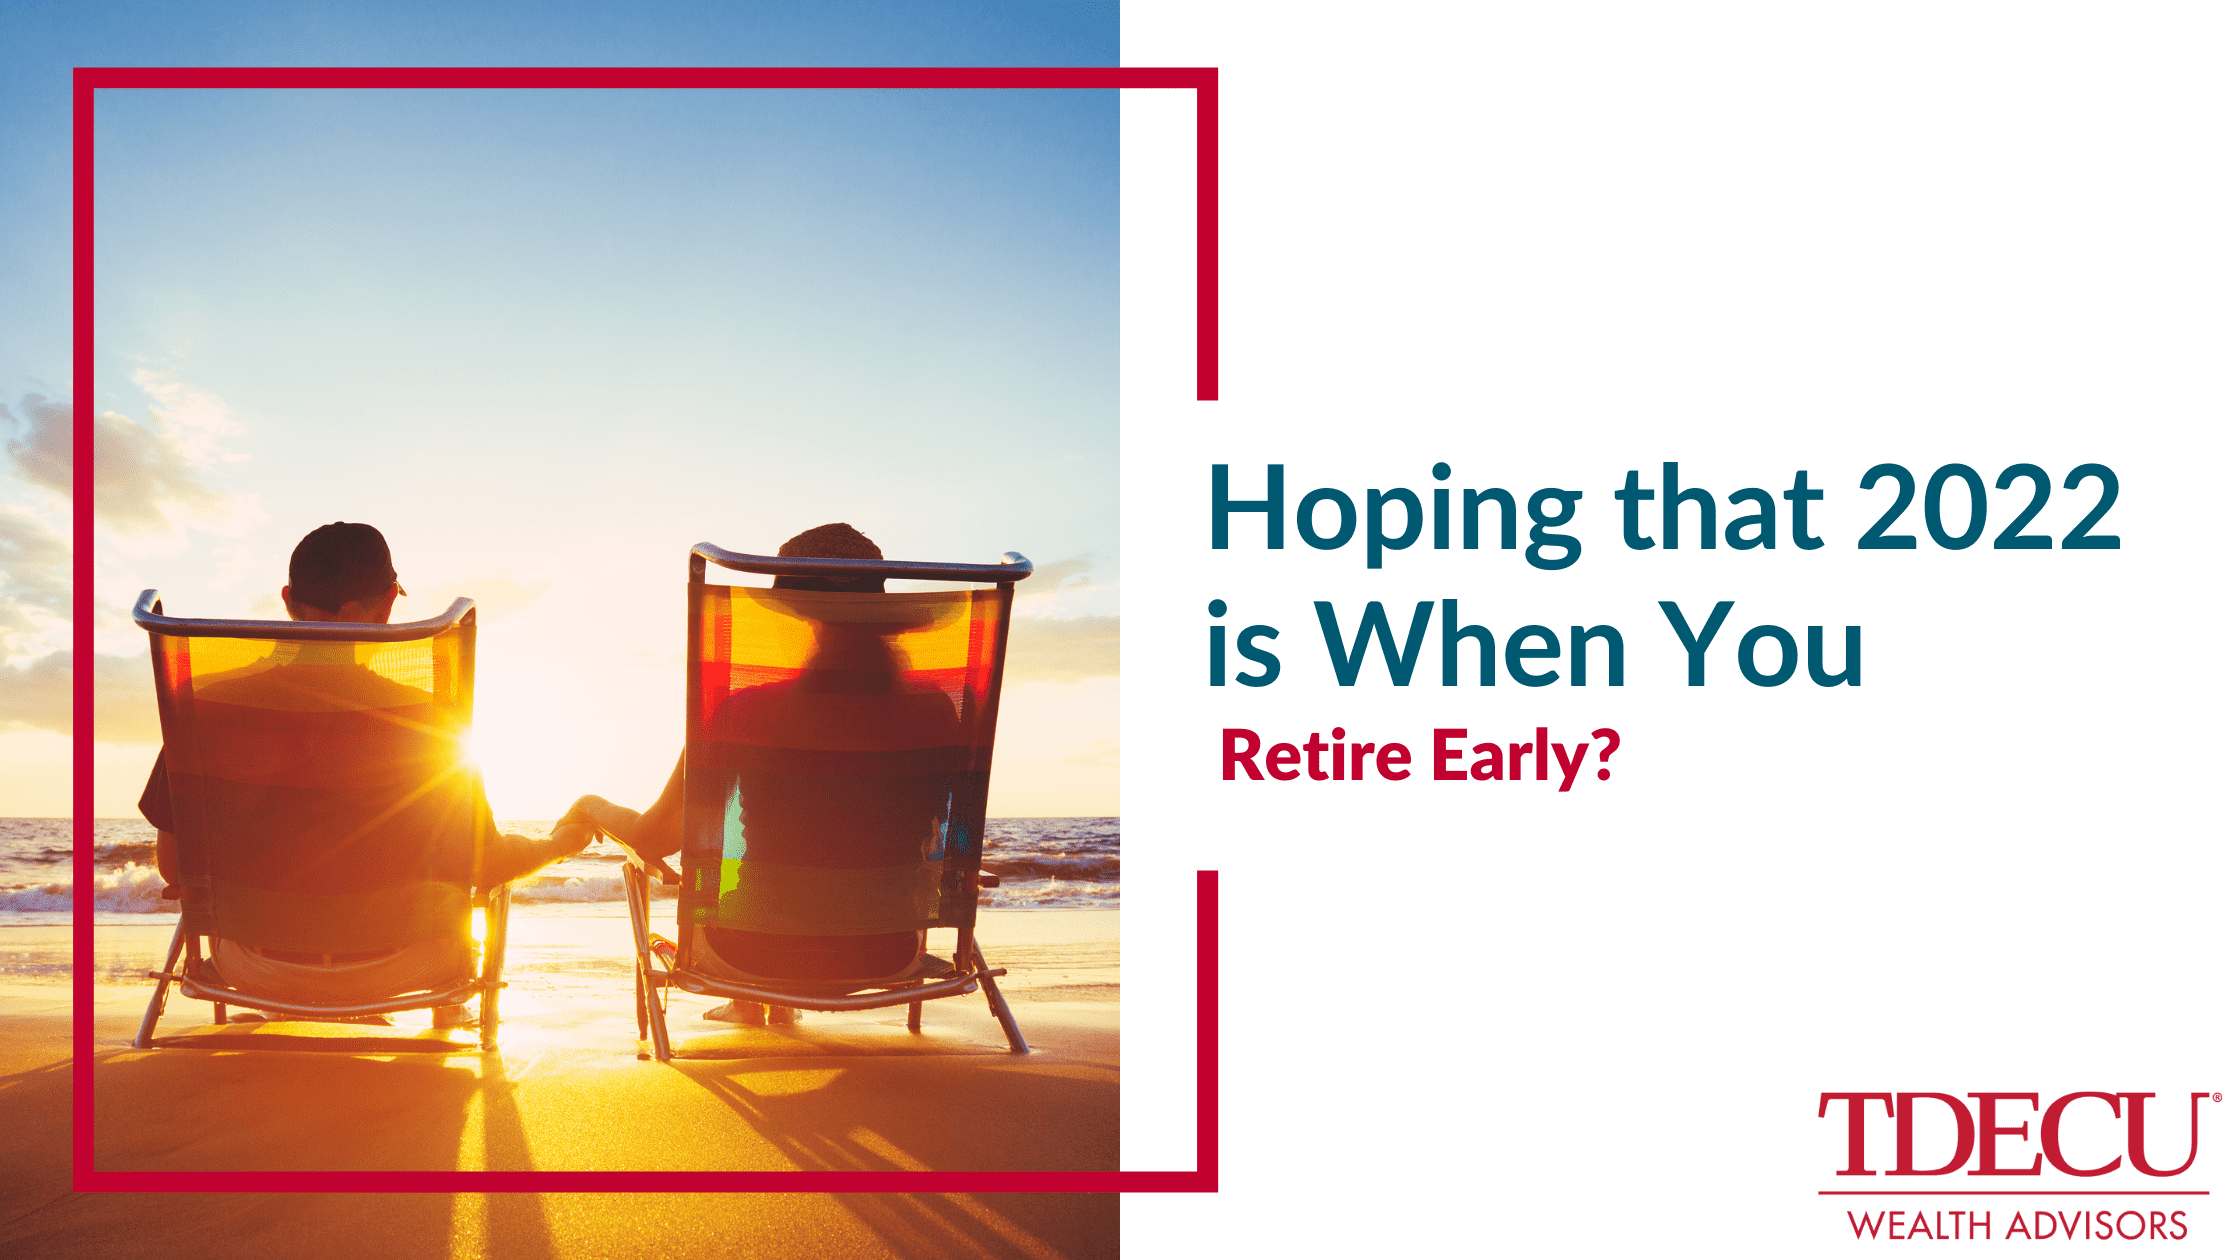 Hoping that 2022 is When You Retire Early?